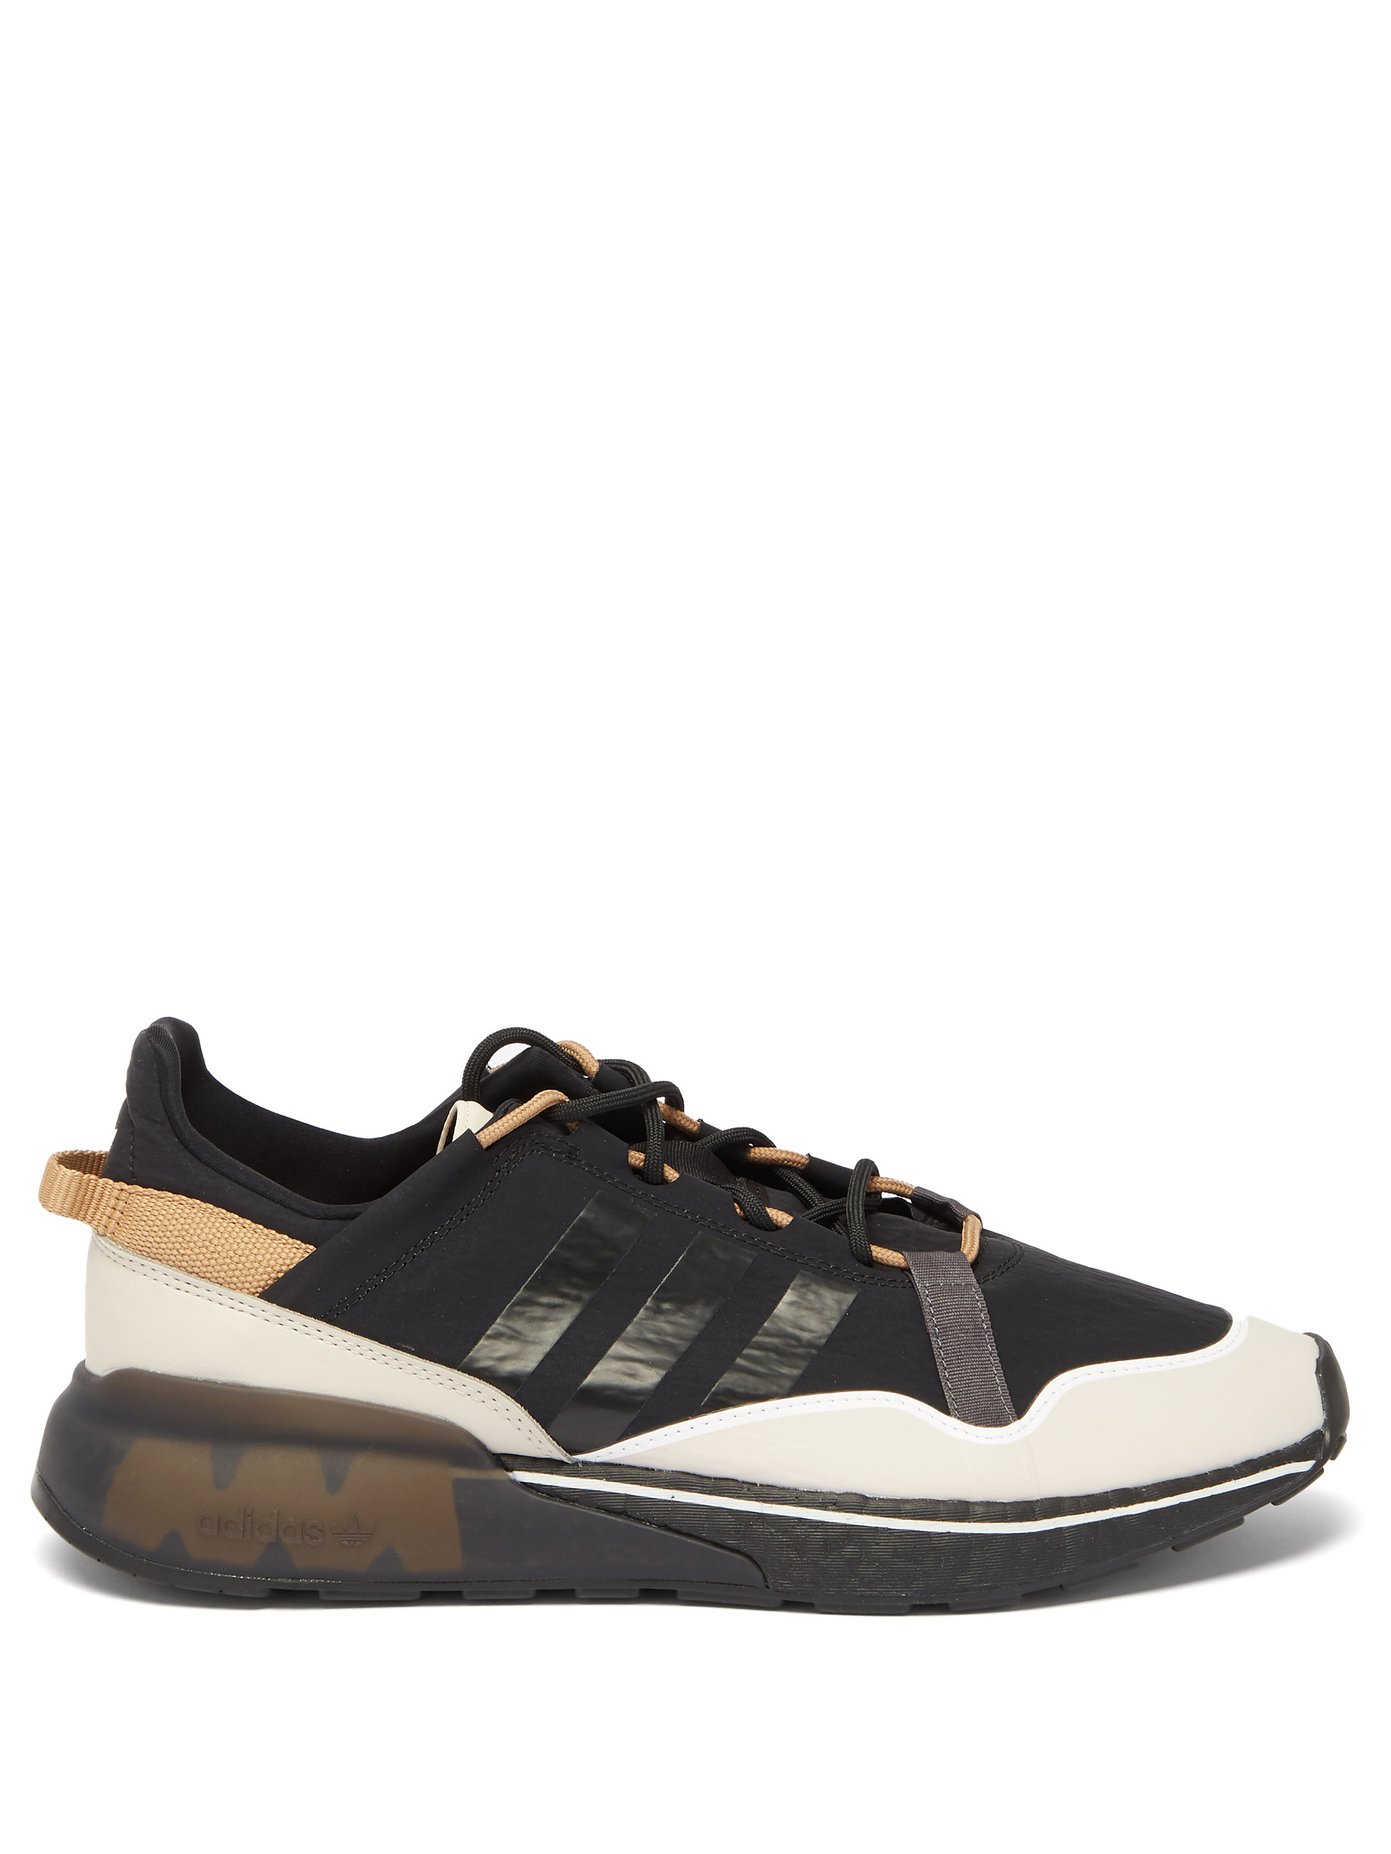 adidas zx trainers black